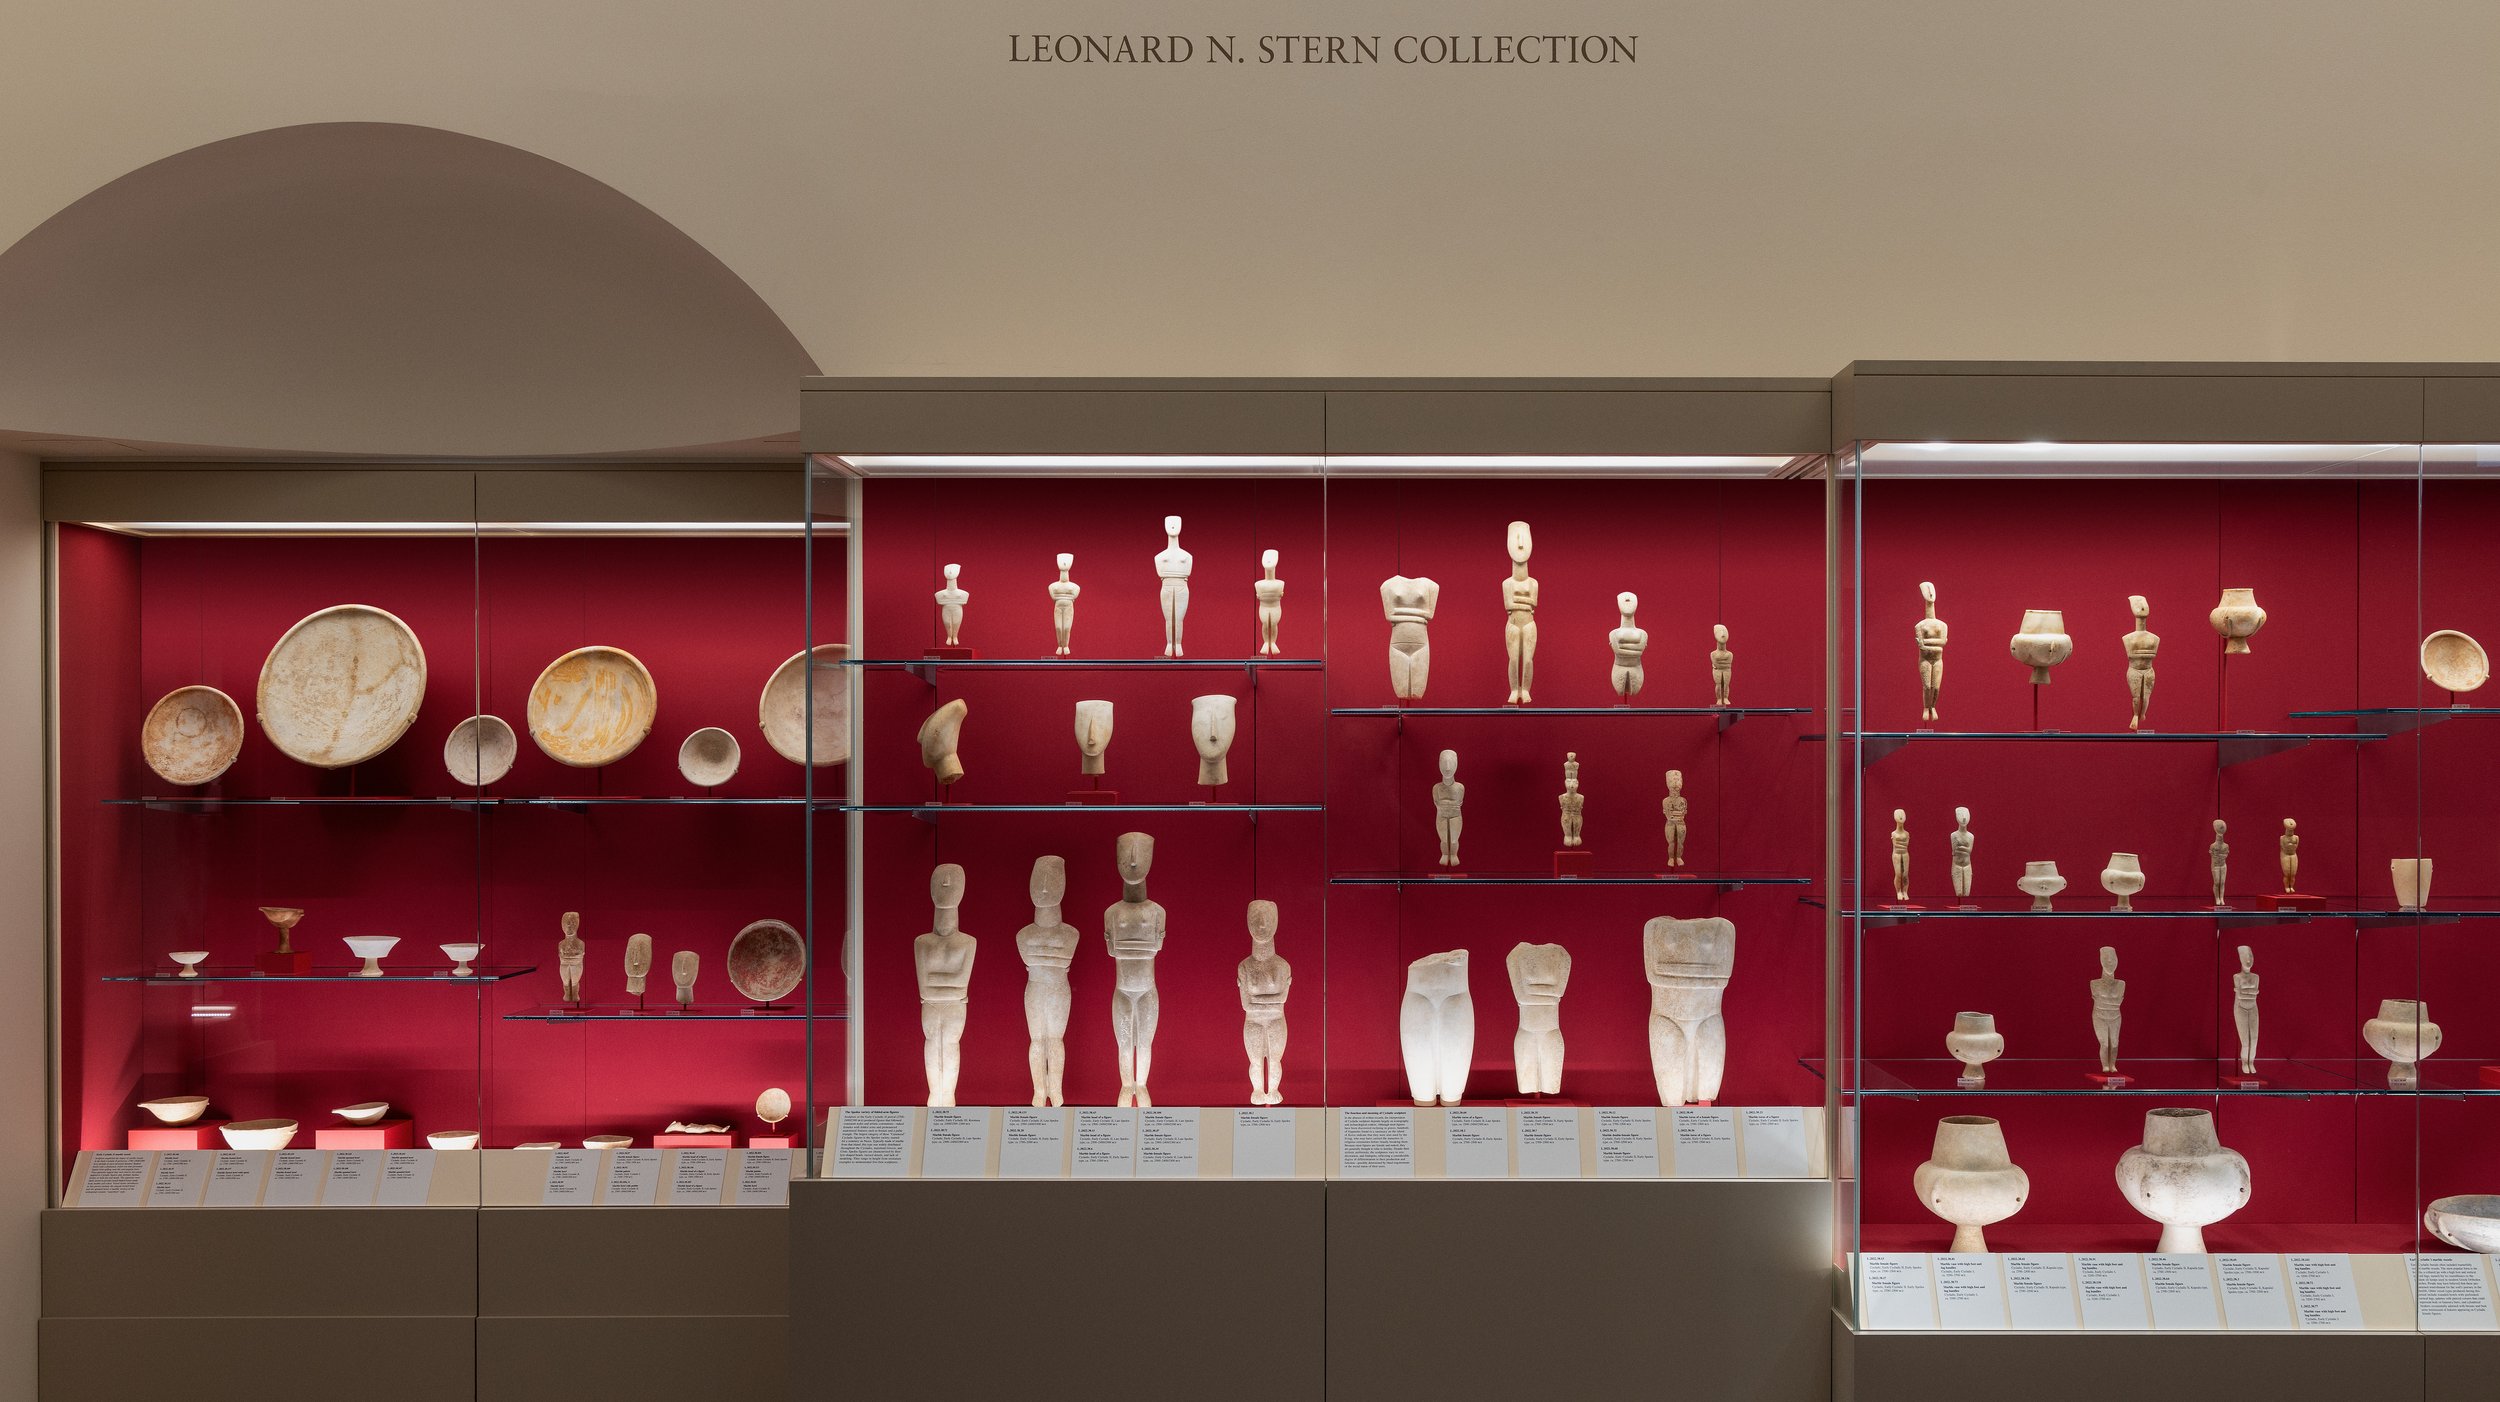   Cycladic Art: The Leonard N. Stern Collection on Loan from the Hellenic Republic  at The Metropolitan Museum of Art, on view January 25, 2024 – ongoing. Image: © The Metropolitan Museum of Art, photo by Bruce Schwarz 